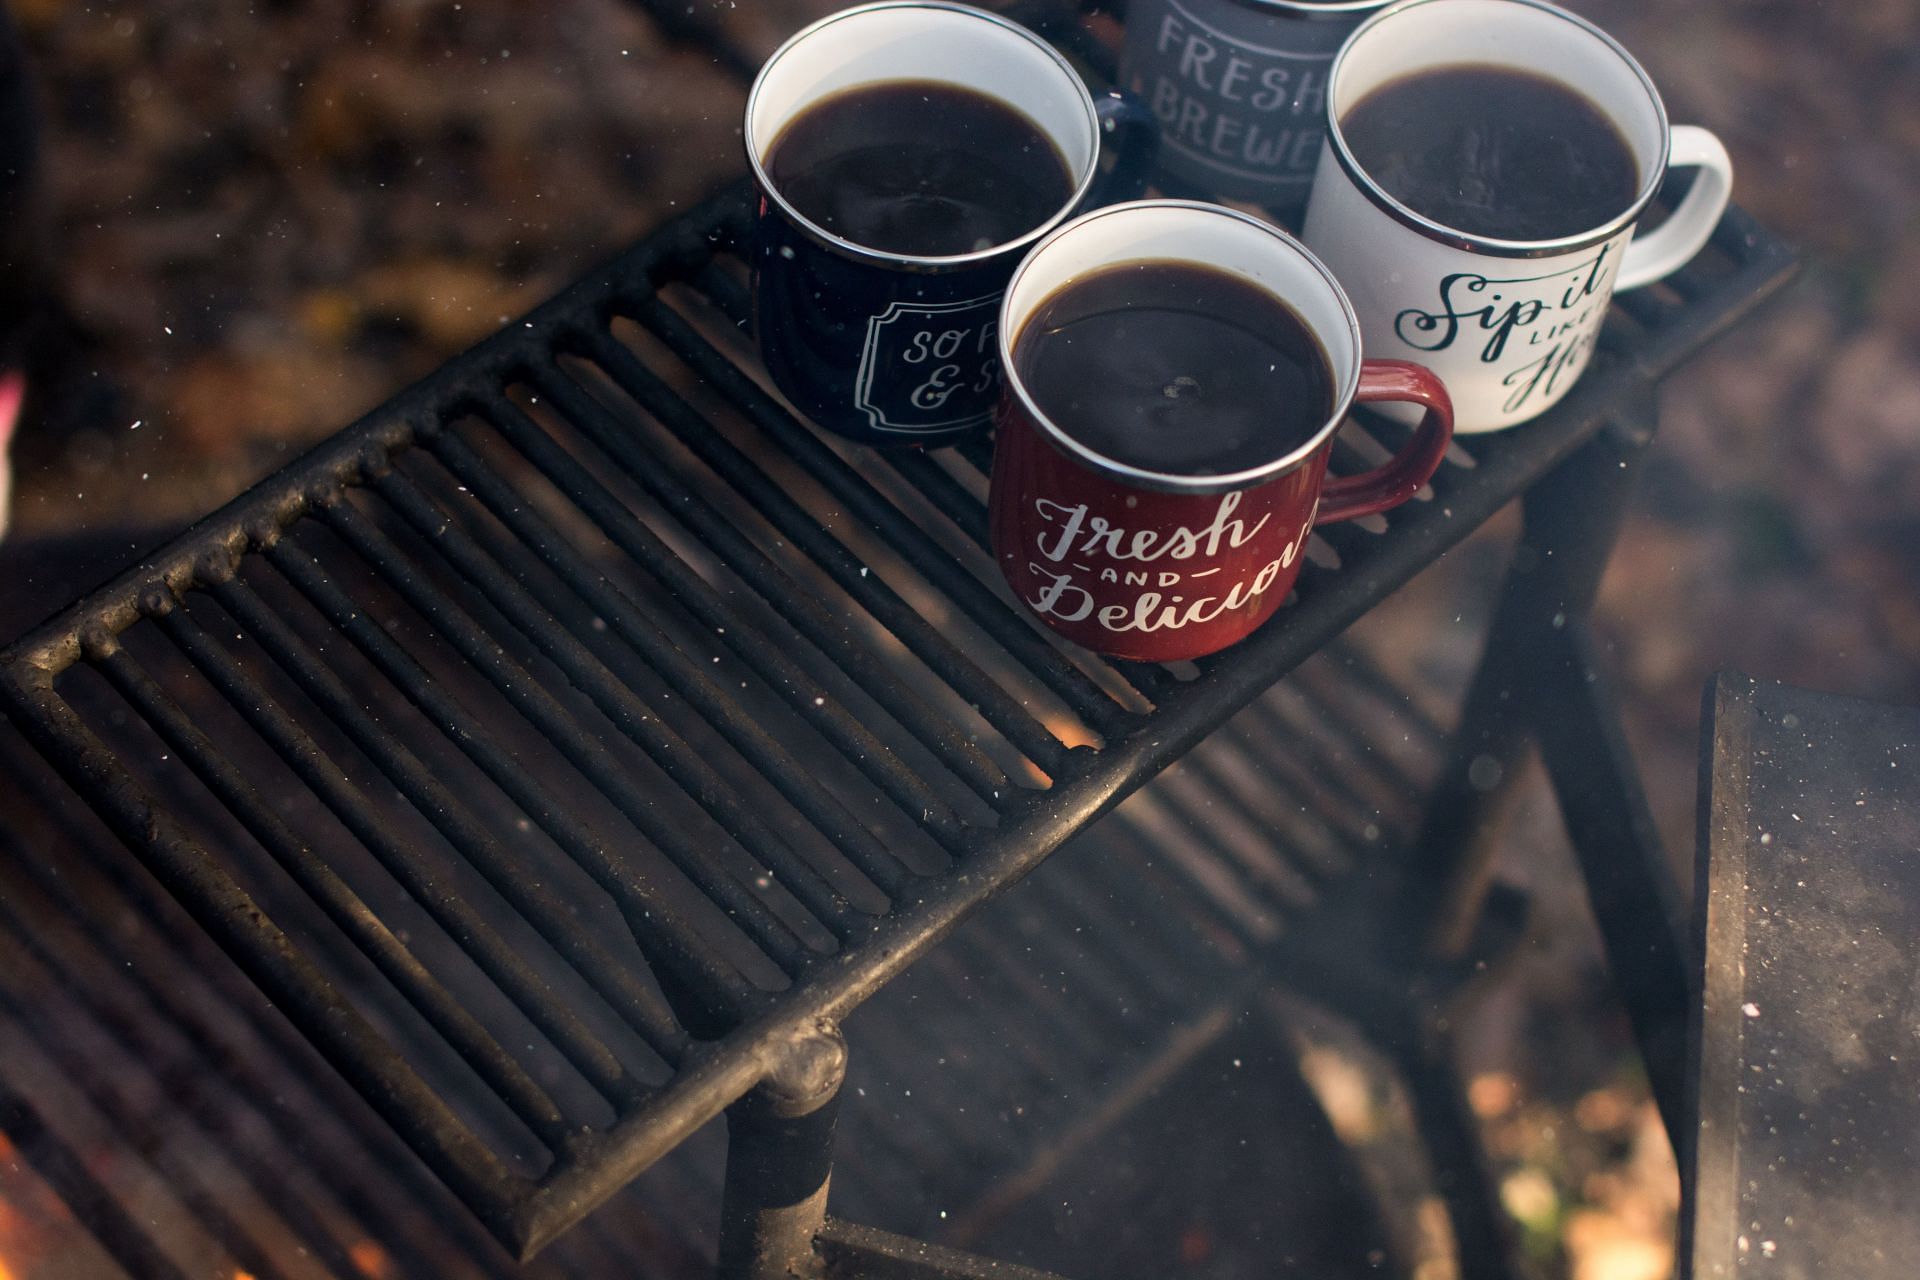 Freshly roasted coffee is better than packaged one. (Image via Unsplash / Lexi Anderson)